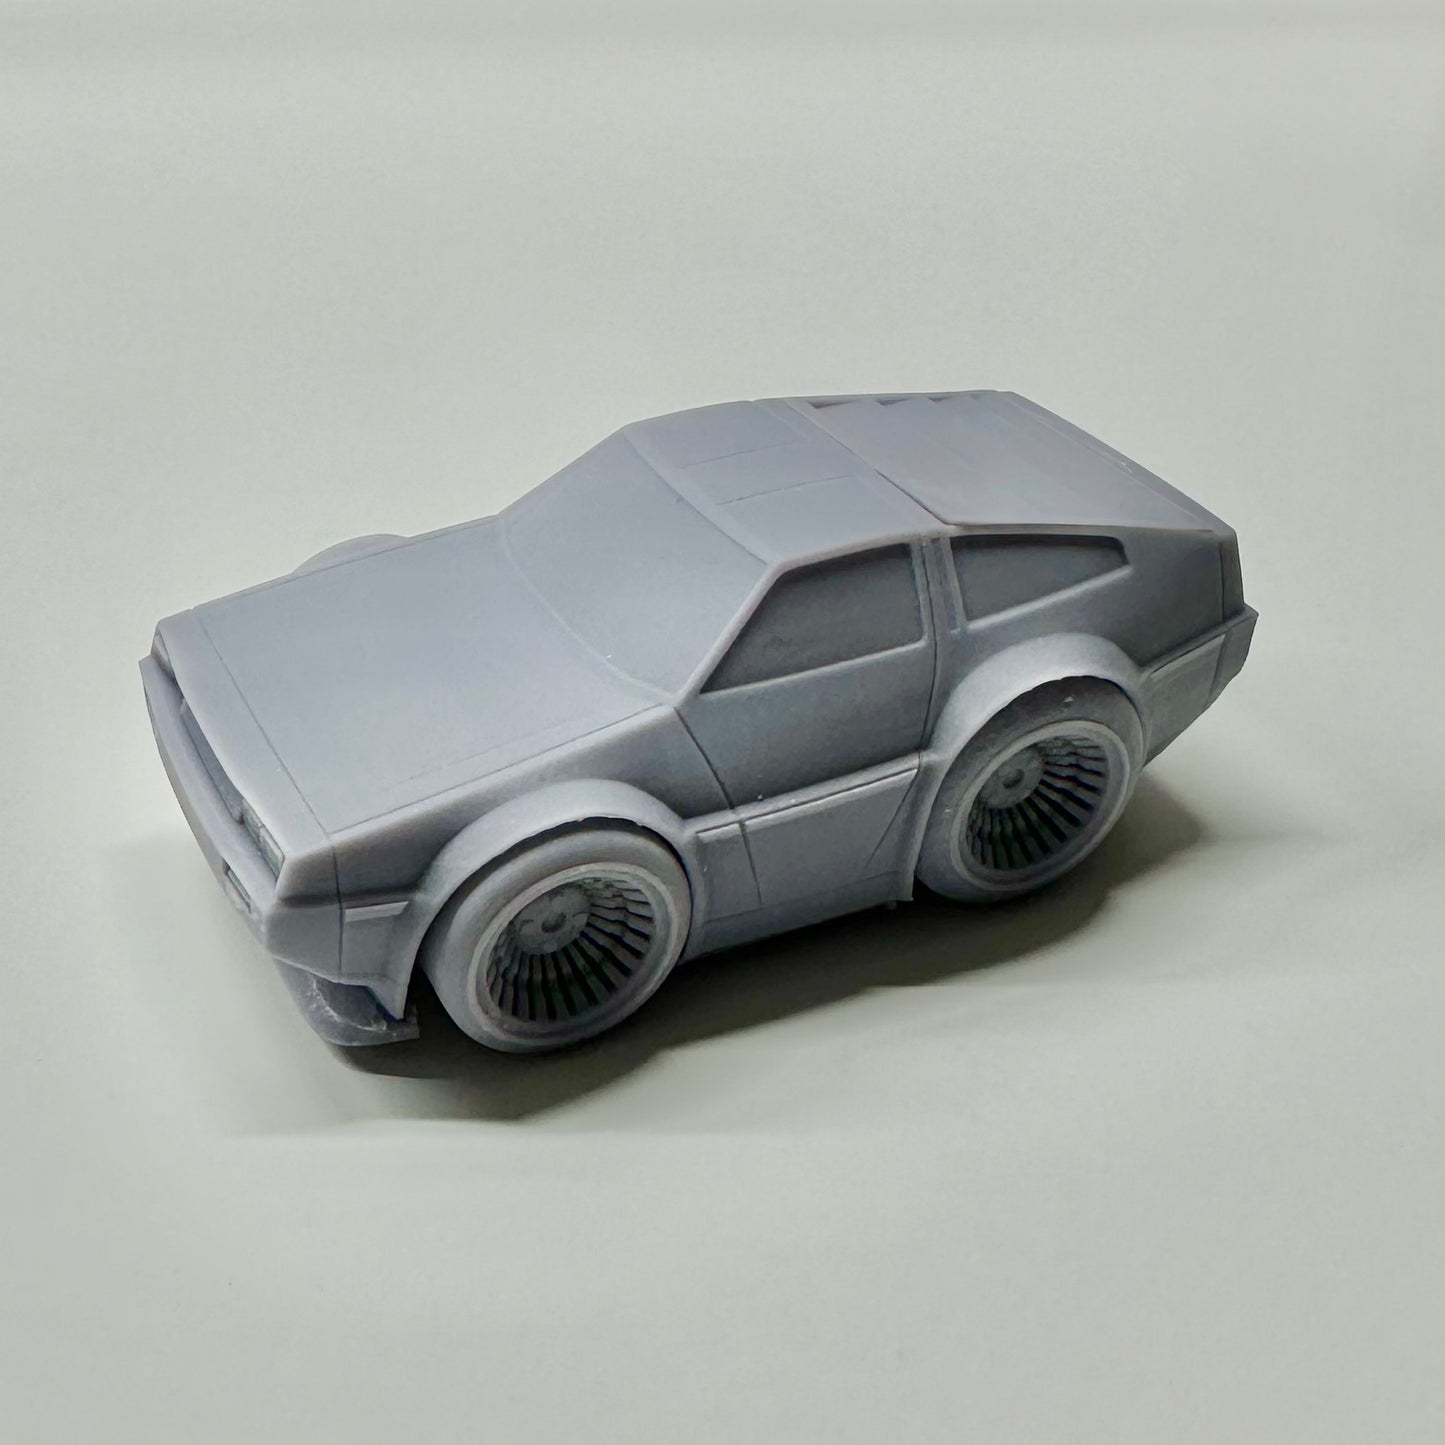 DeLorean Toon Car - Limited Release